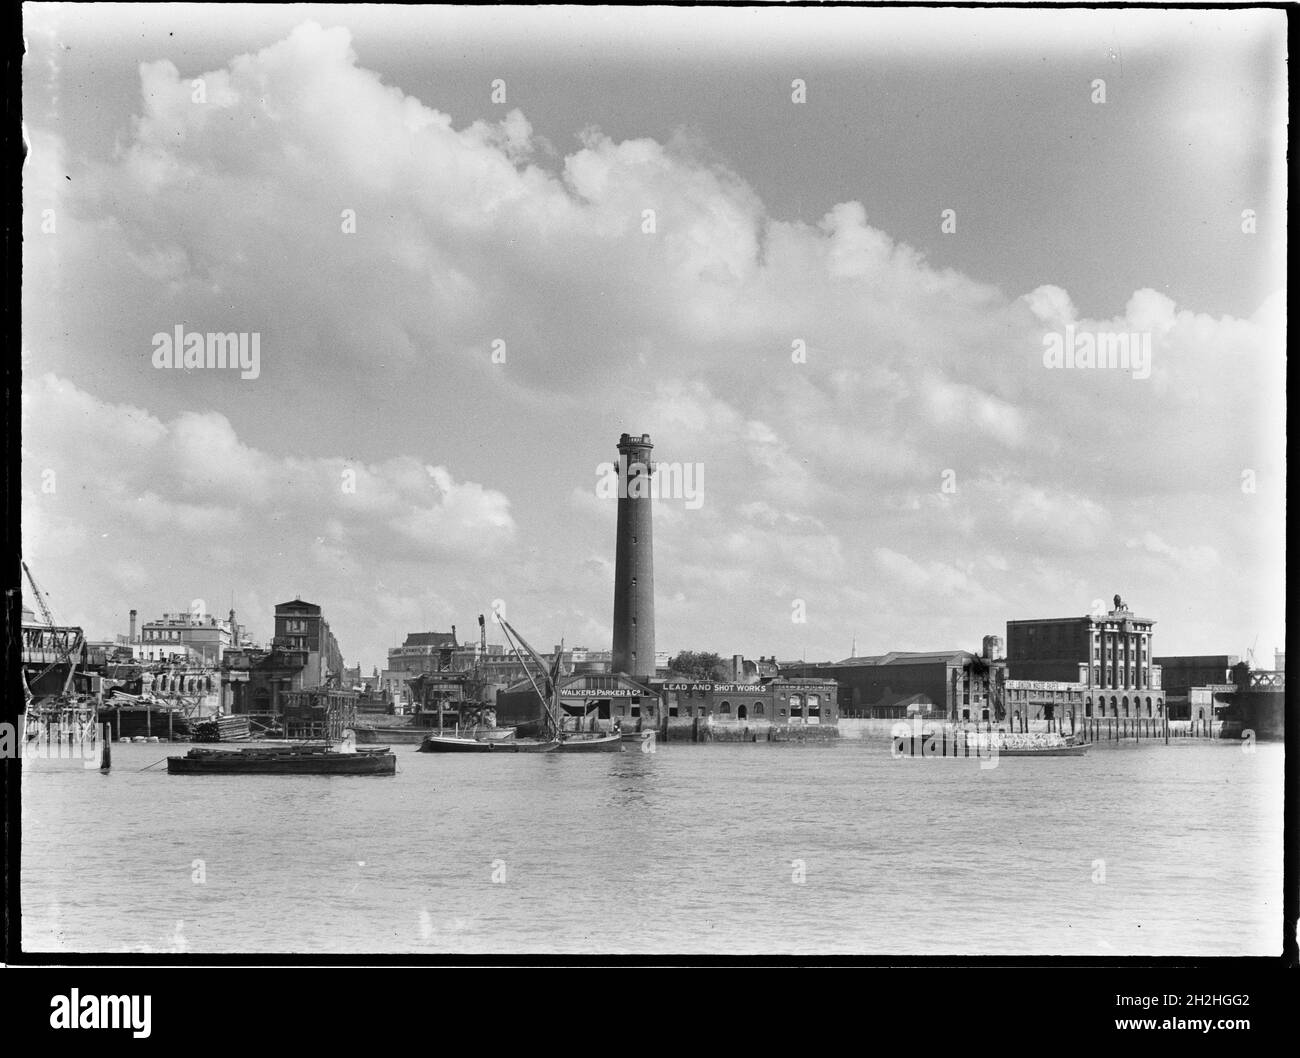 Shot Tower and Lead Works, Belvedere Road, Lambeth, Greater London Authority, 1936. A view across the River Thames towards the shot tower at Lambeth Lead Works with the Lion Brewery on the right. The shot tower of the Lambeth Lead Works was designed by David Ridall Roper and was built in 1826 for Thomas Maltby &amp; Co. At the time of this photograph it was operated by Walkers, Parker &amp; Co but it was later demolished in 1962 to make way for the Queen Elizabeth Hall. The Lion Brewery was built in 1836-37 but was later demolished in 1949 to make way for the Royal Festival Hall. Stock Photo